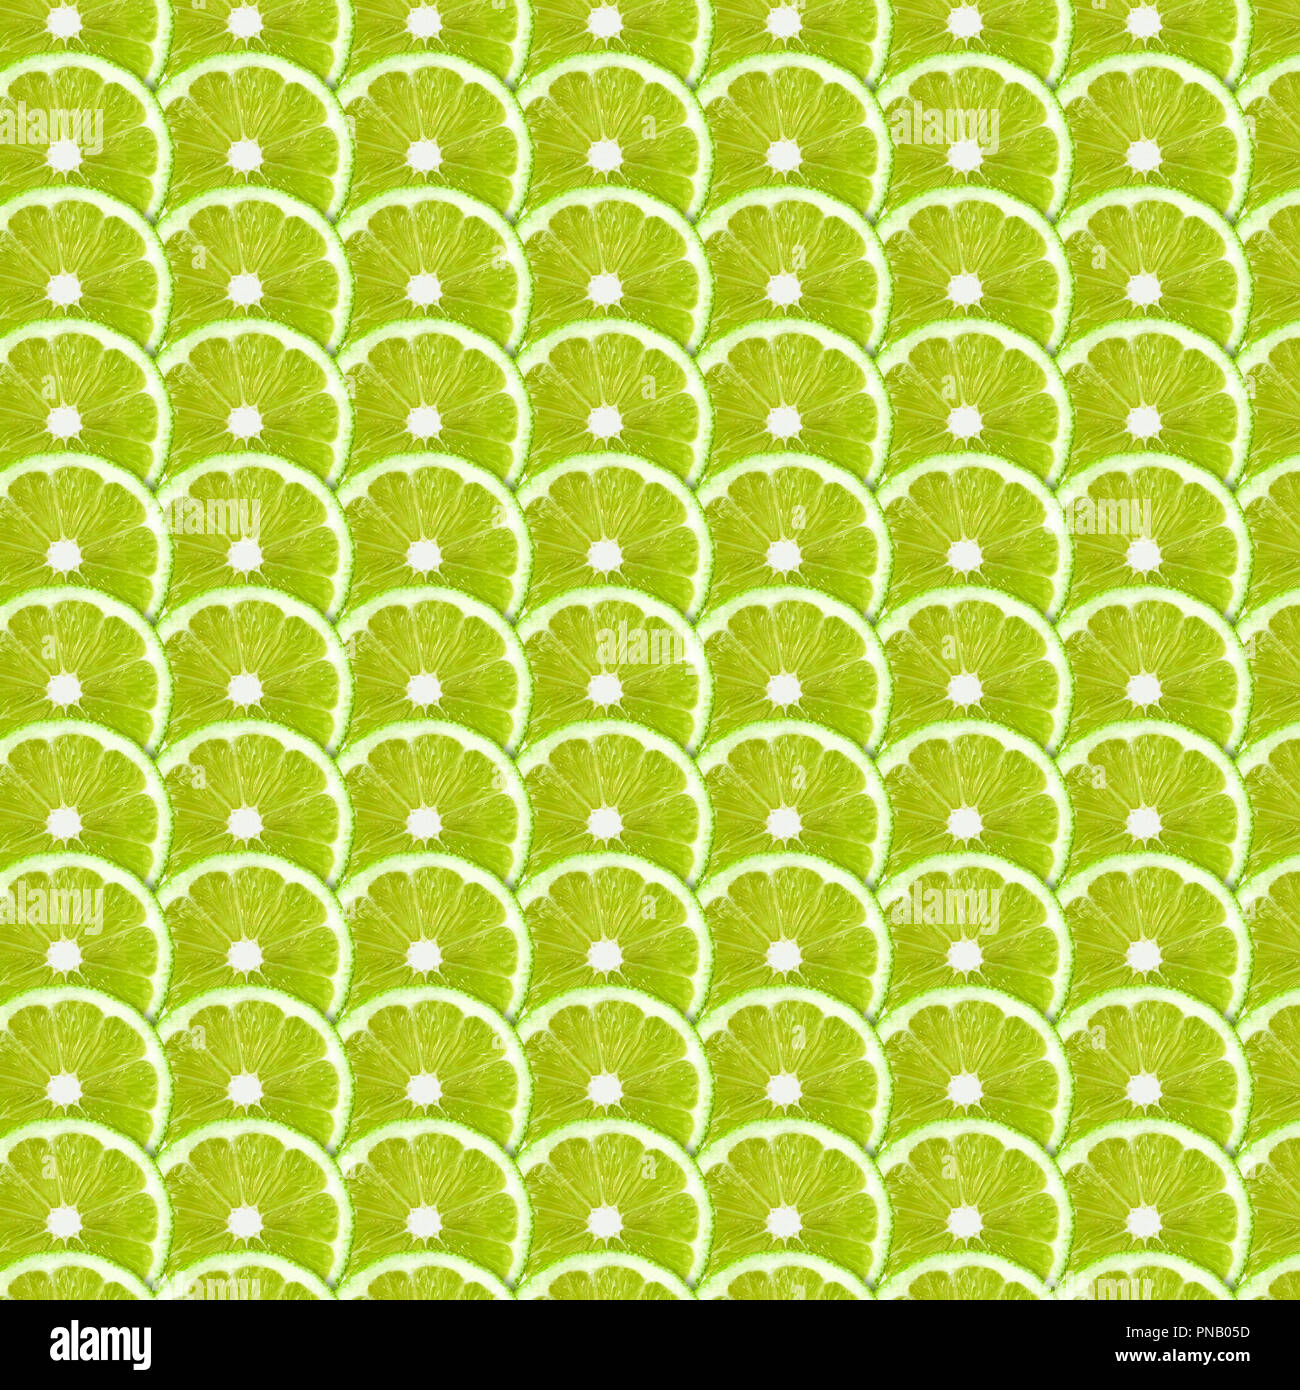 Green lime slices pattern background. Natural symmetrical full frame food texture Stock Photo